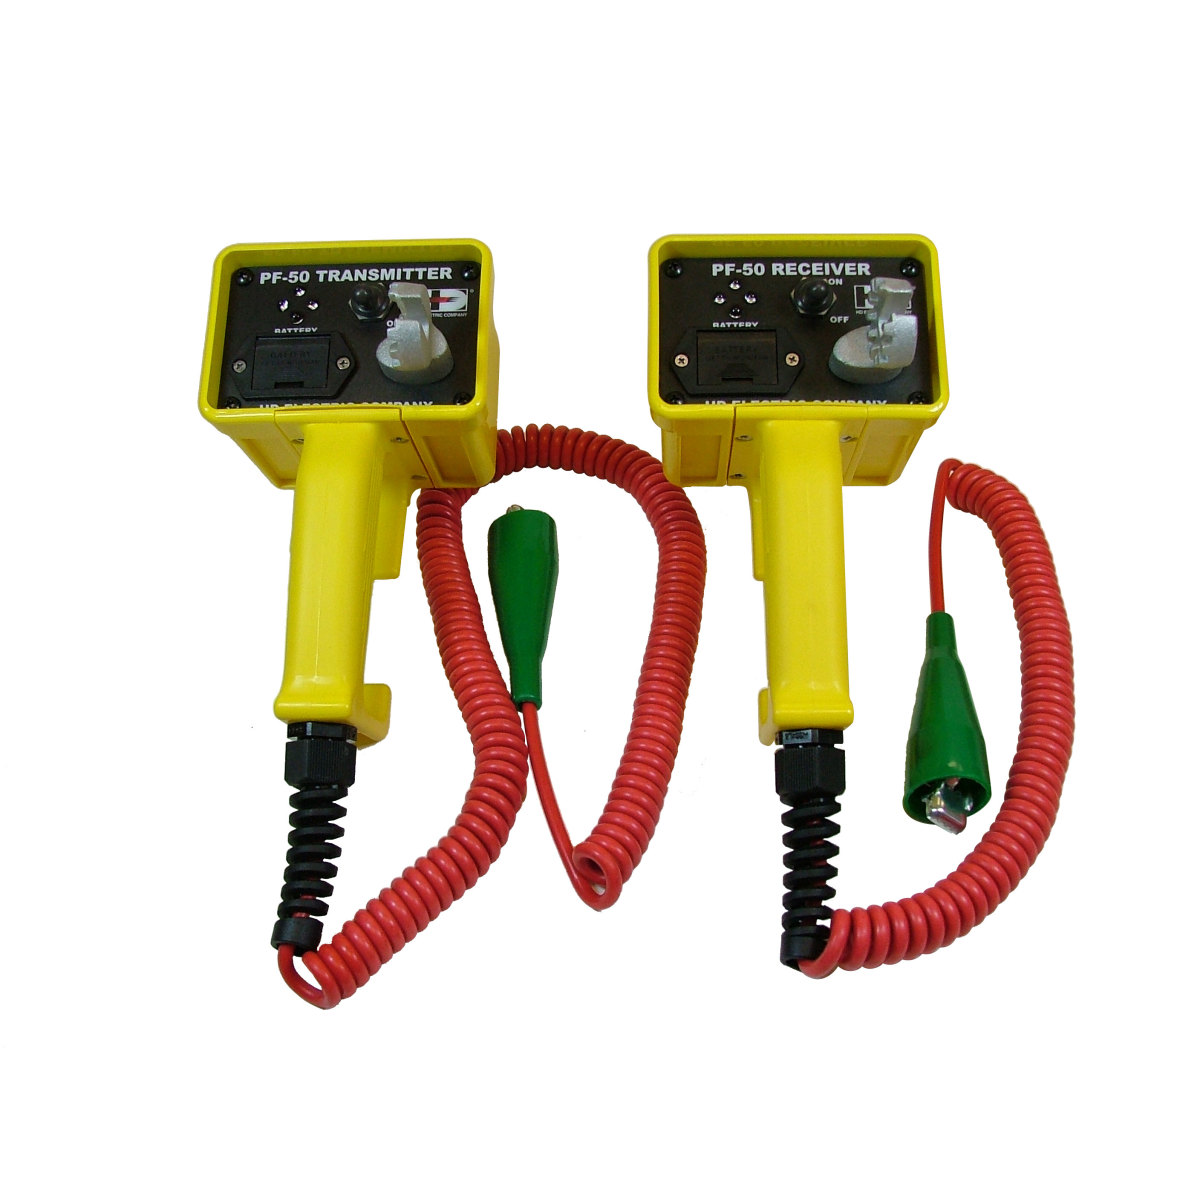 Identifies matching phase on long deenergized and discharged conductors.  50VDC test voltage enables identification of up to 5,000 foot-long conductors.  Compact, lightweight and easy-to-use solution.  Versatile for overhead and underground applications